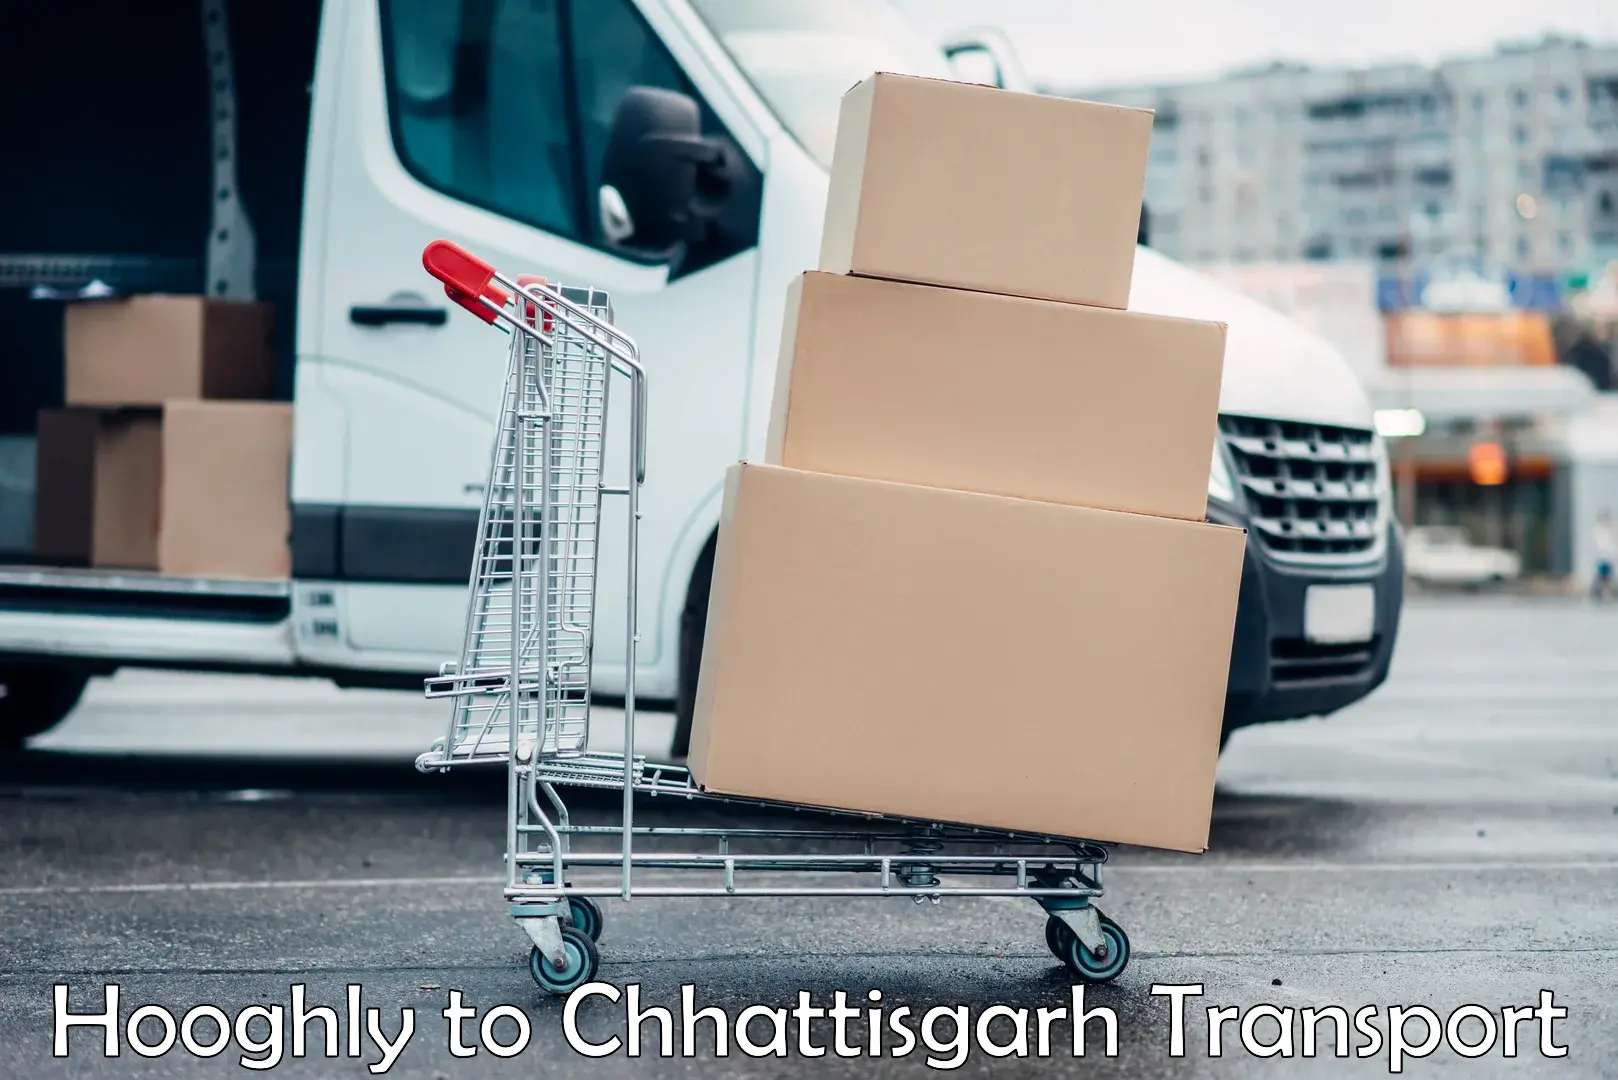 Package delivery services Hooghly to Patna Chhattisgarh